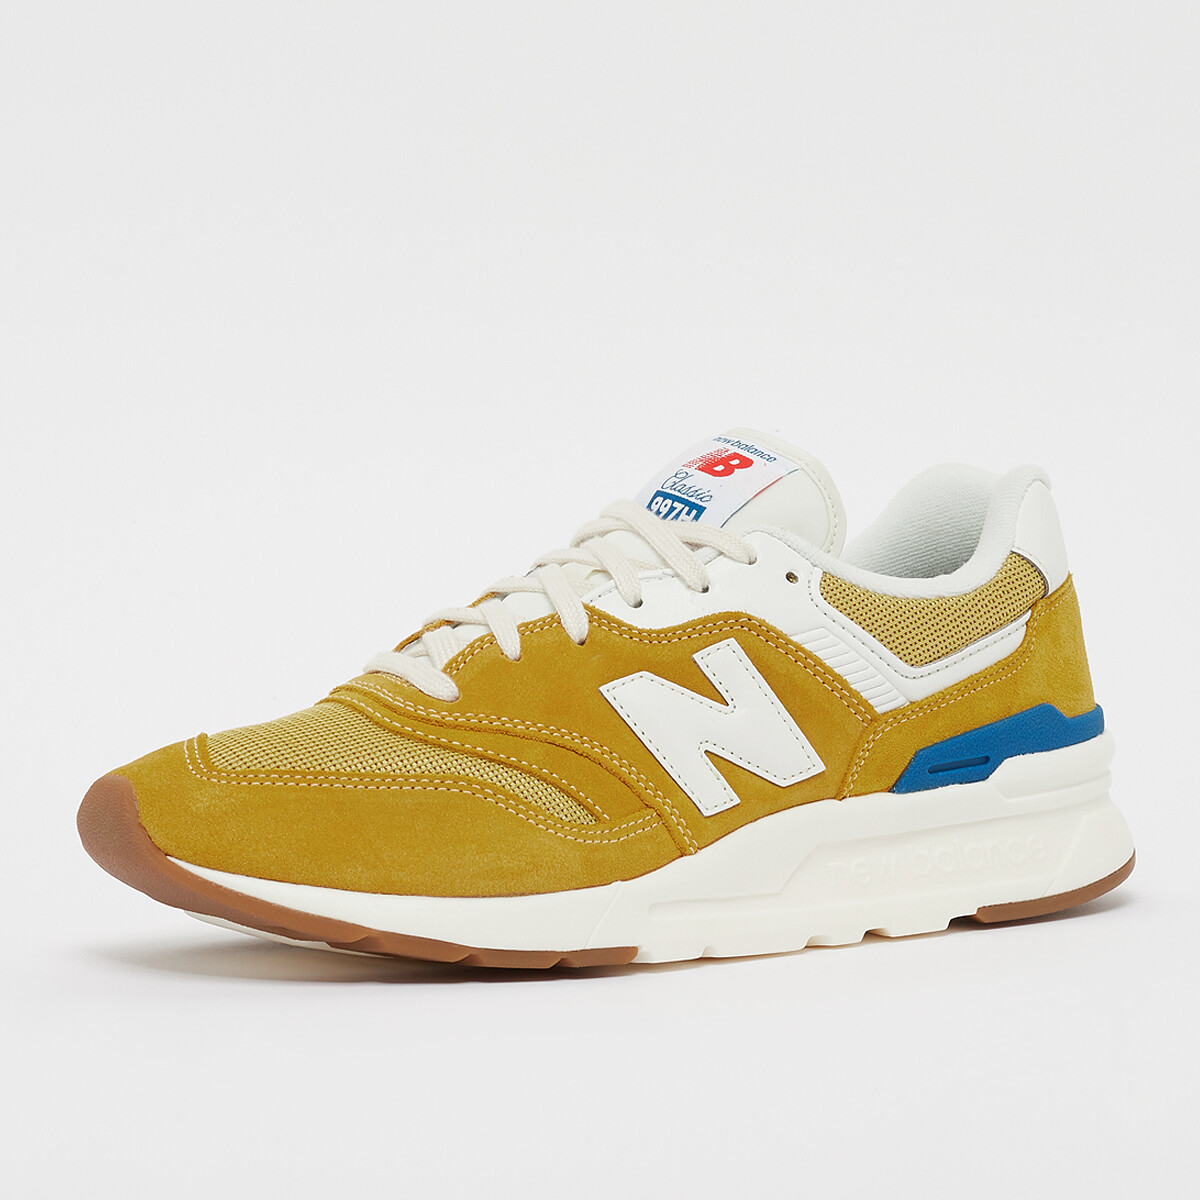 Buy New Balance 997H varsity gold/light rogue wave from £60.00 (Today ...